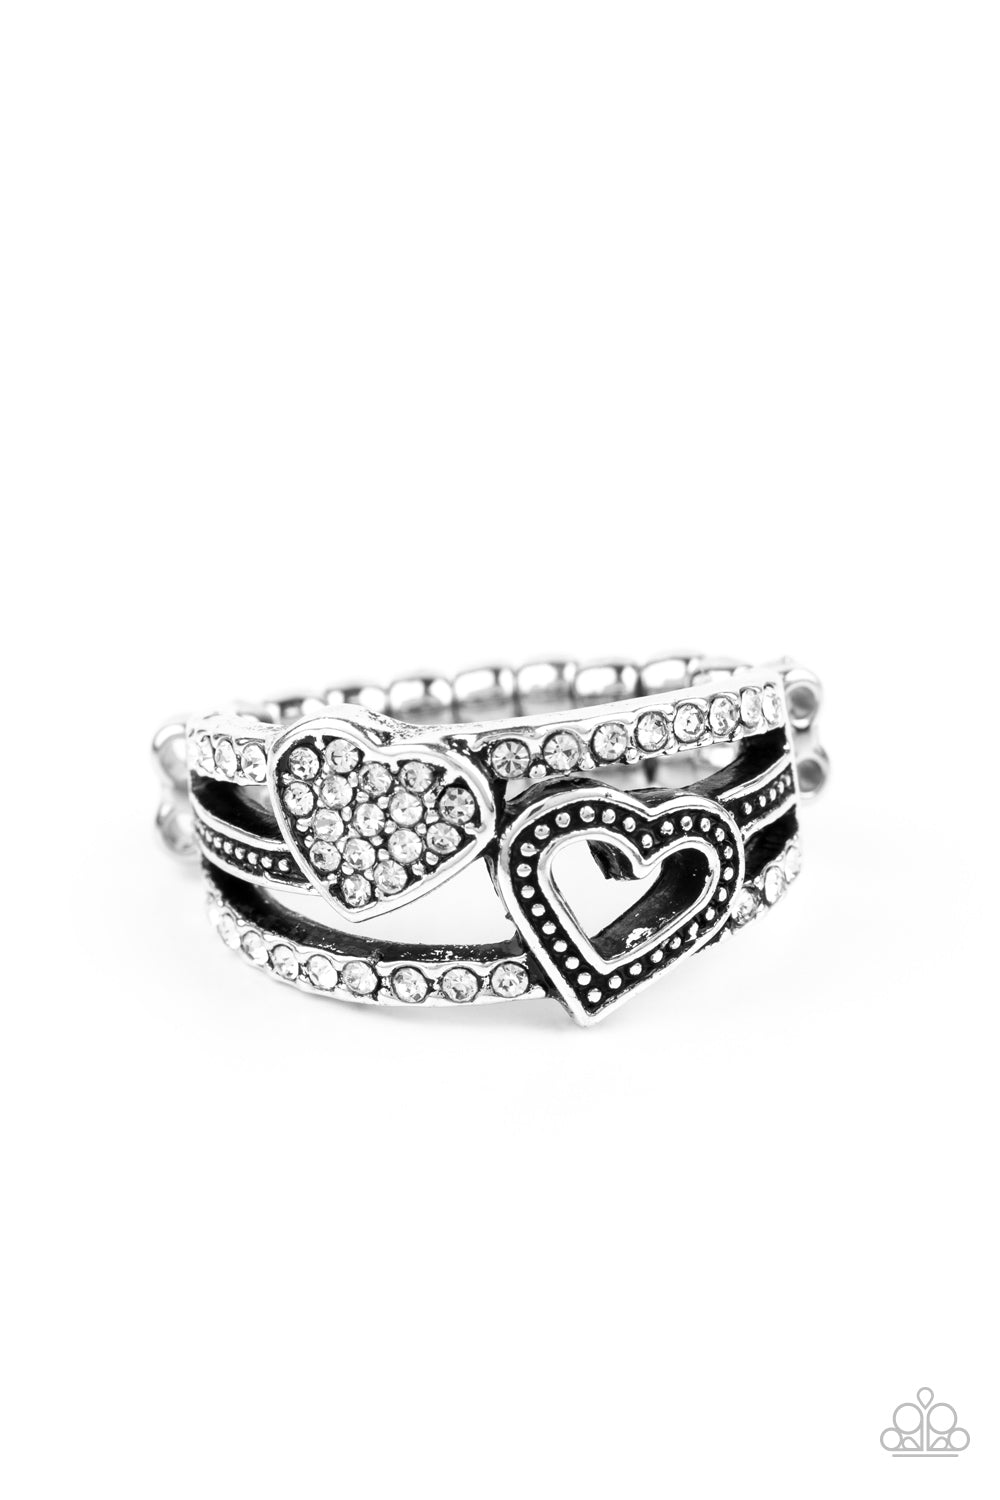 Paparazzi Accessories You Make My Heart BLING - White Rings two rows of white rhinestone encrusted bands flank a dainty silver band dotted in antiqued studs across the finger. A white rhinestone encrusted heart and studded silver heart overlap the layered bands, creating a colorfully charming centerpiece. Features a dainty stretchy band for a flexible fit.